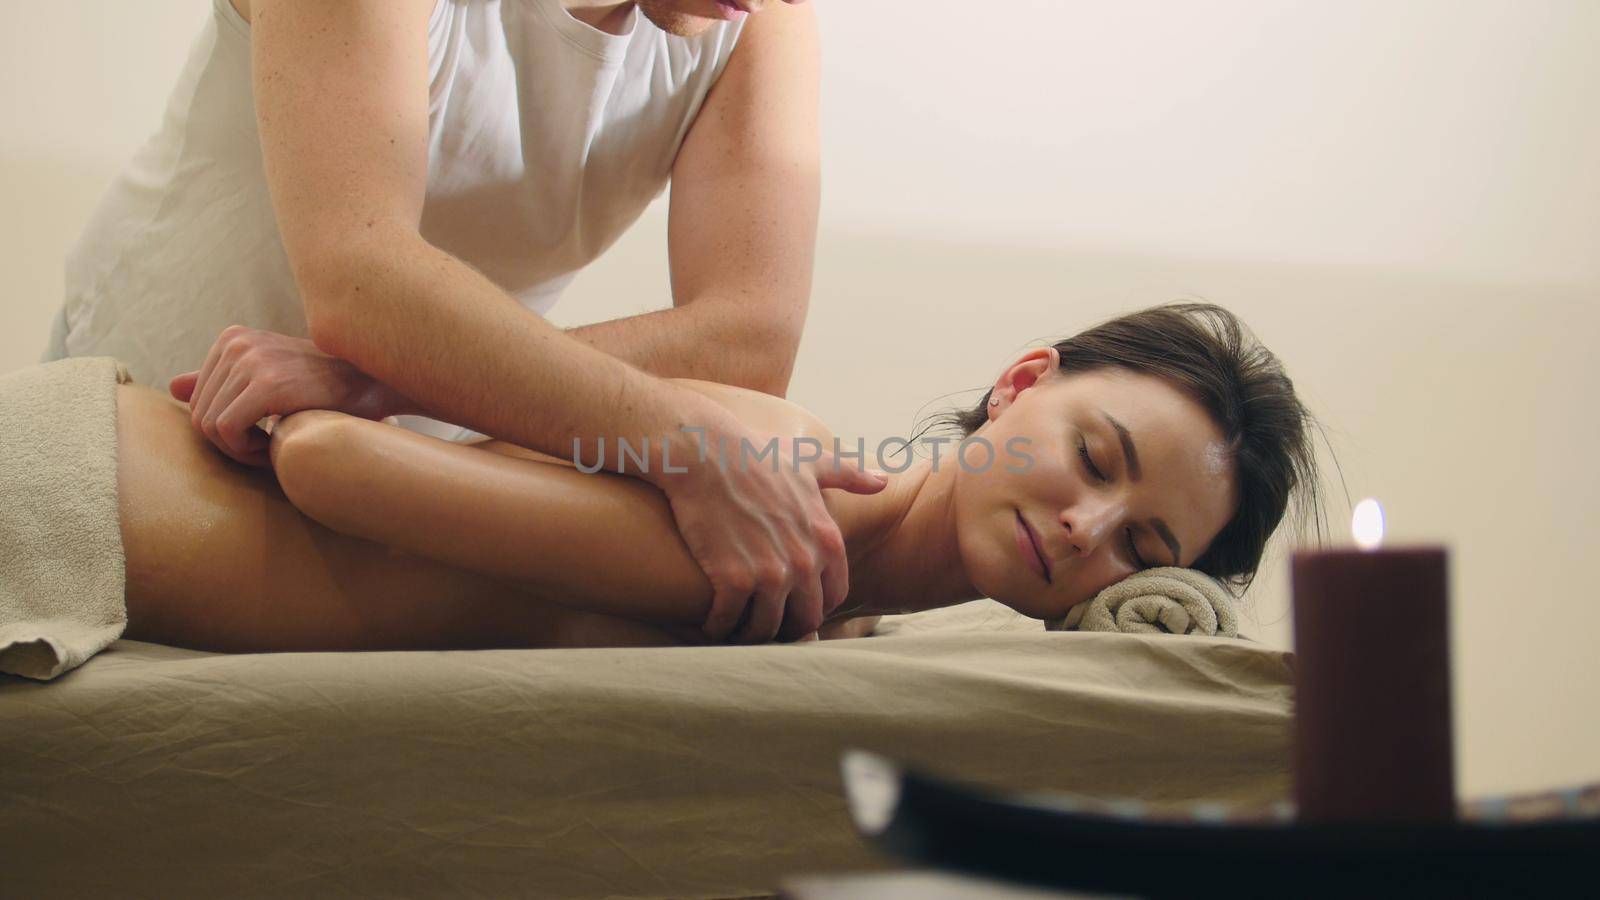 Classical massage in the spa salon - relaxation therapy for attractive young model, close up